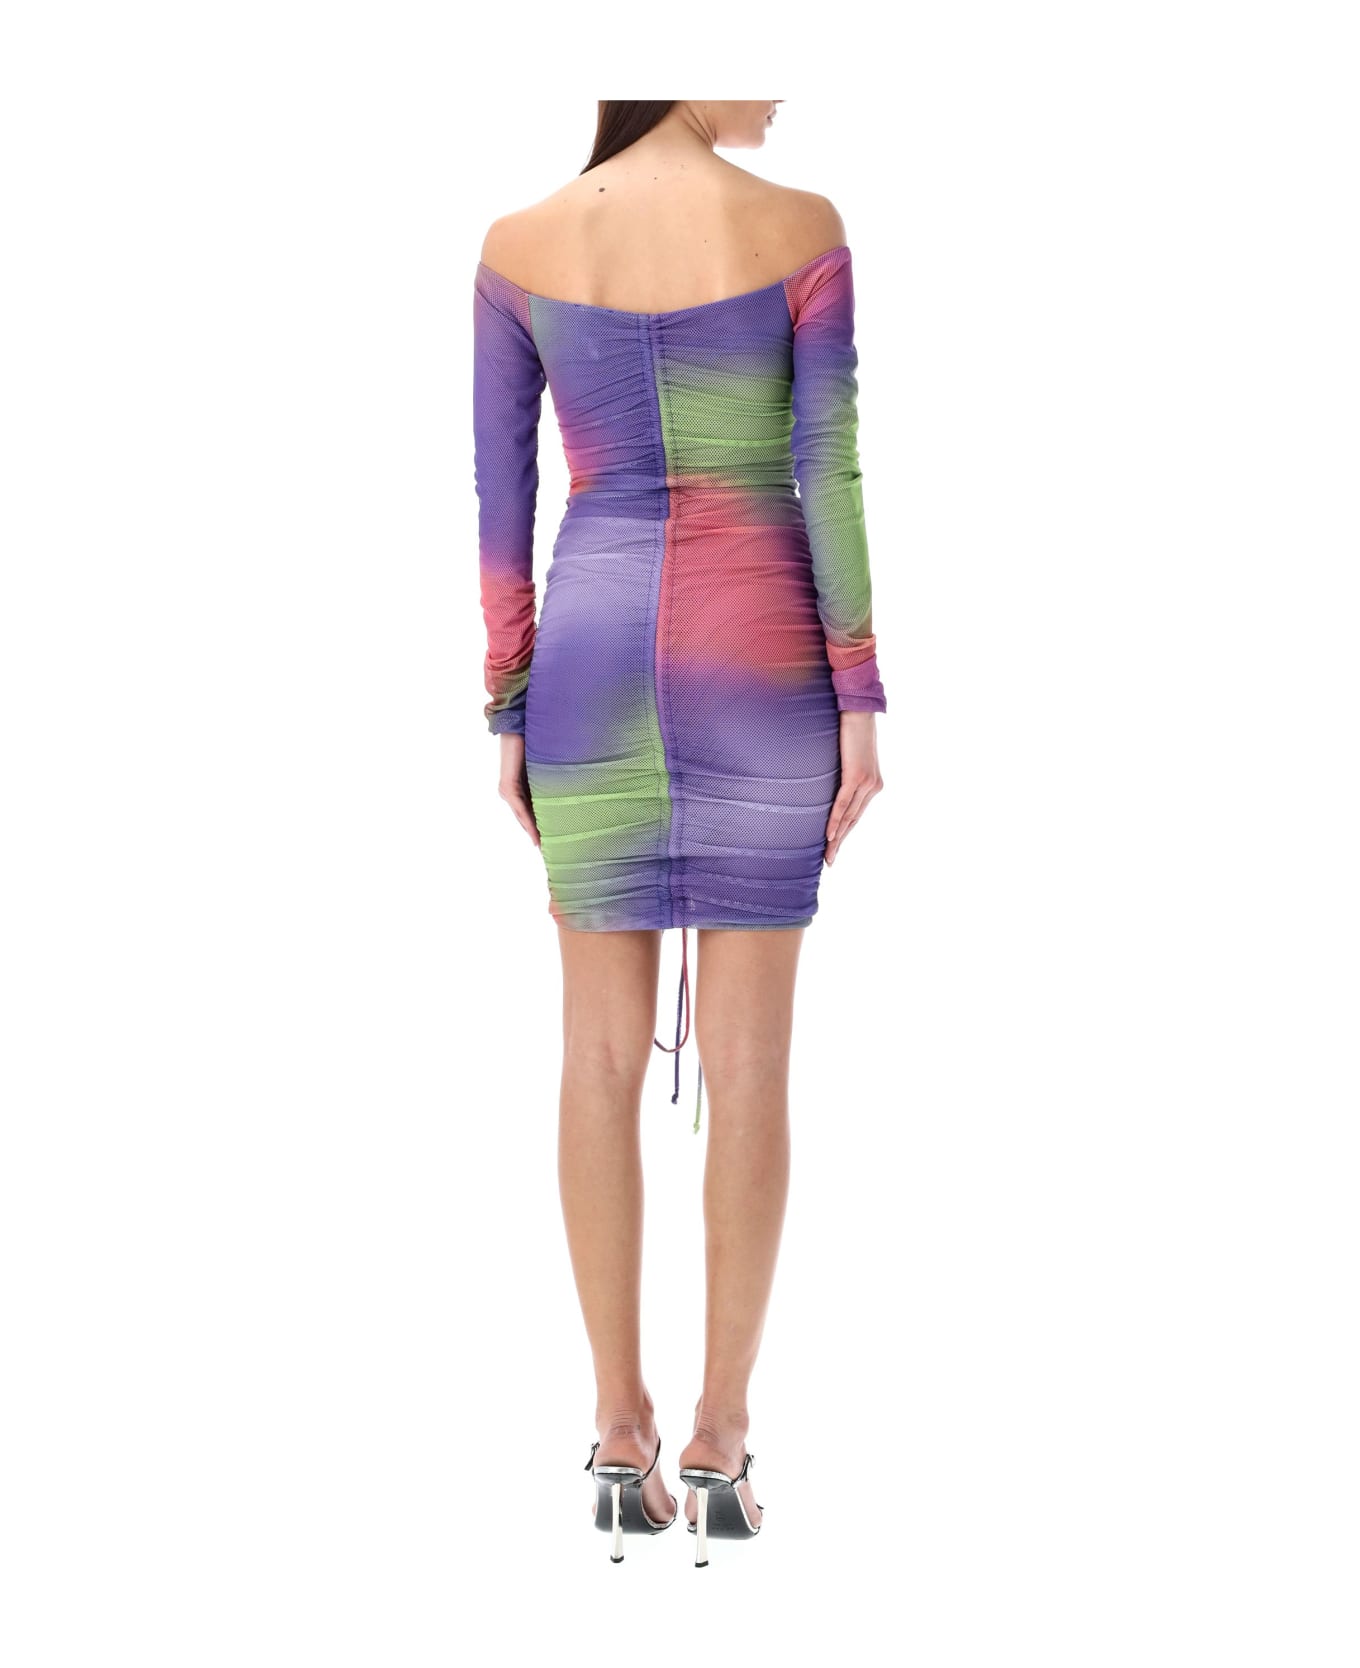 Emporio Armani Camouflage Print Recycled Mesh Dress - Violet